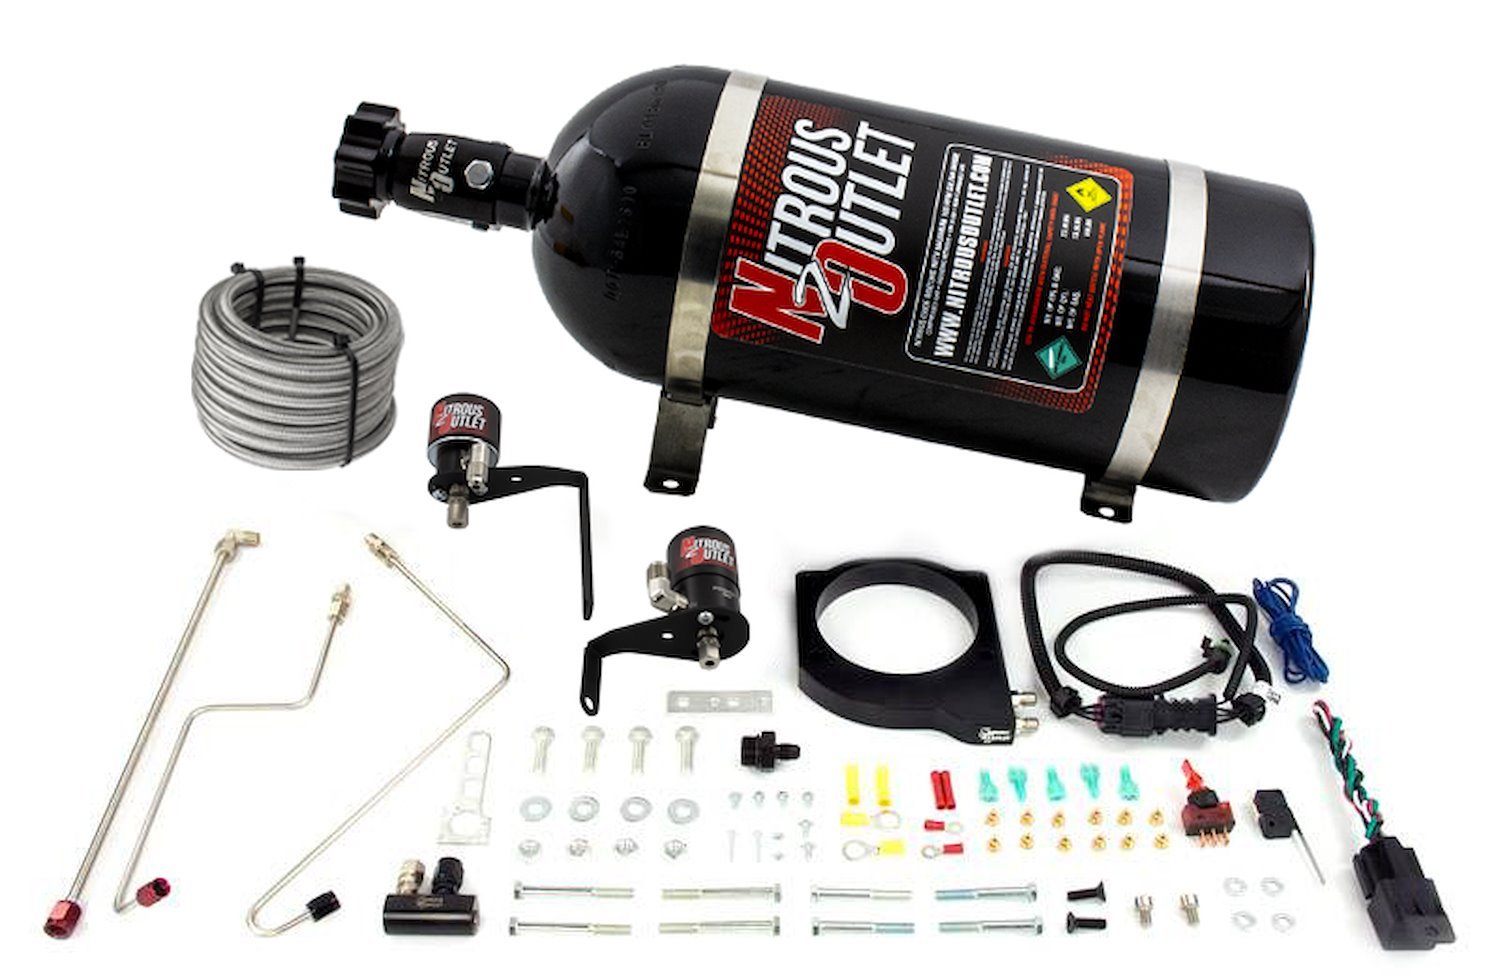 00-10119-102-00 Hard-Line Plate System, GM 102 mm Fast Intake 2010-2015 Camaro, Gas/E85, 5-55psi, 50-200HP, No Bottle